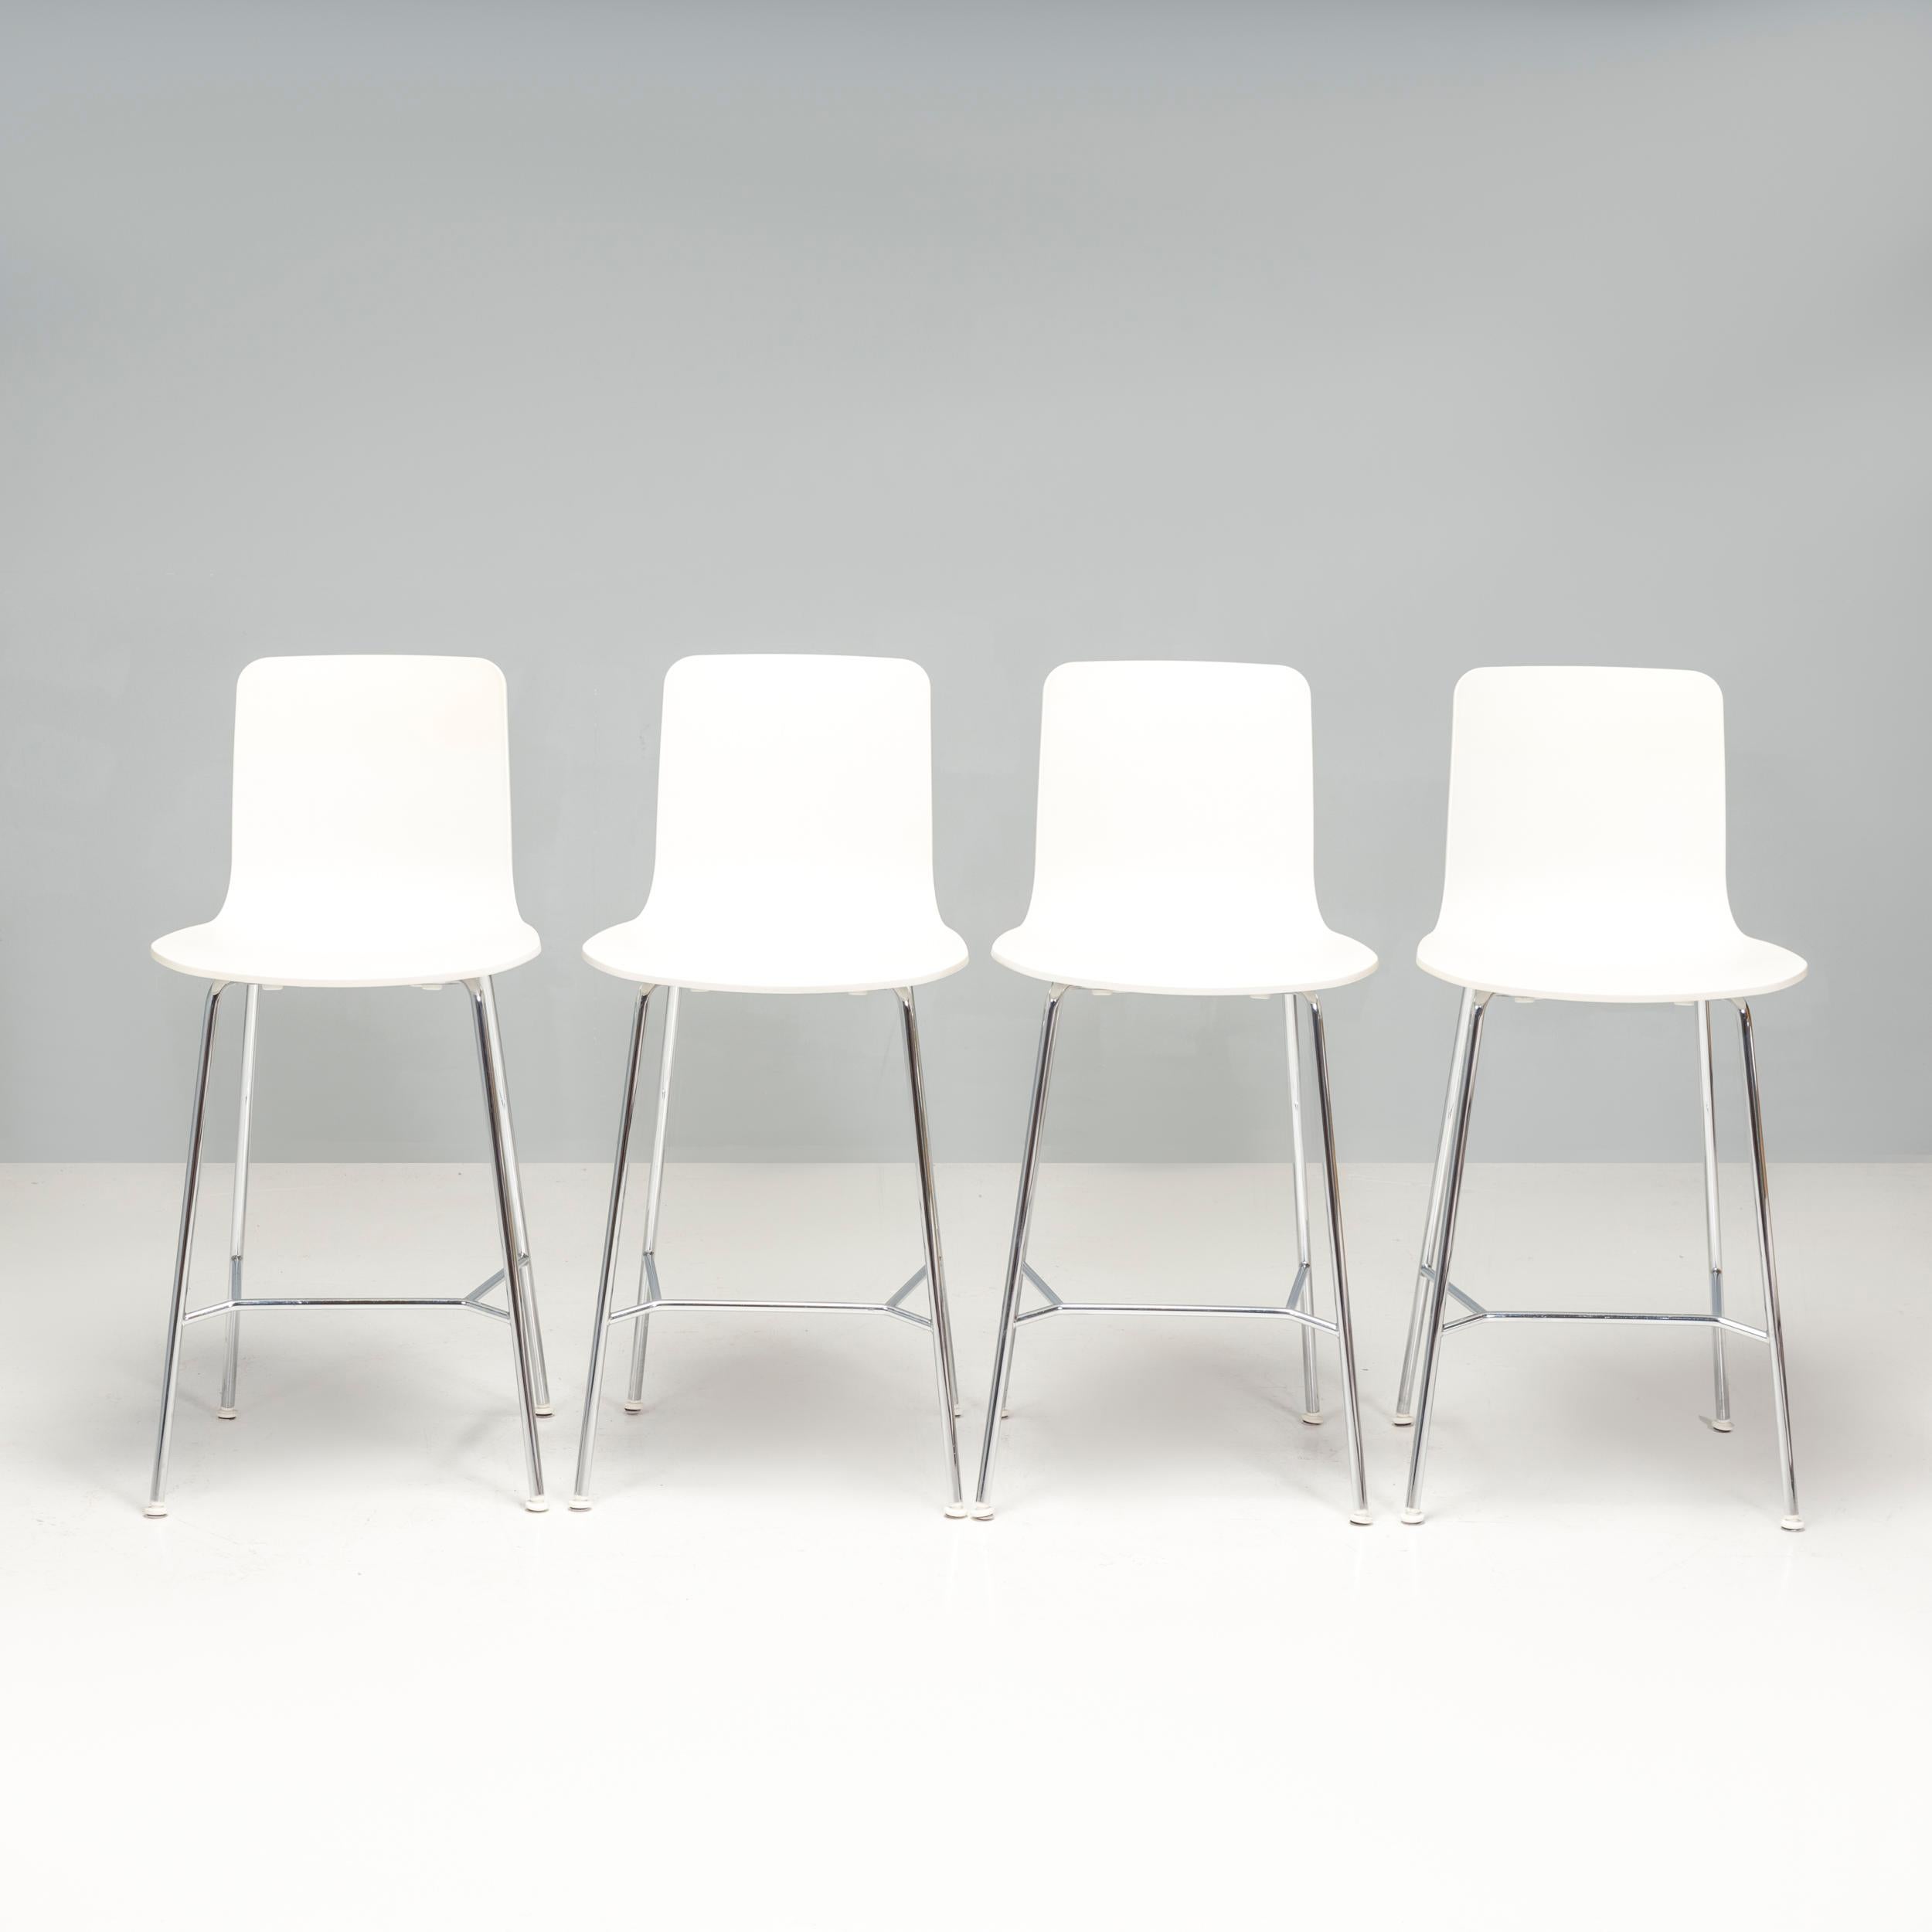 HAL is Jasper Morrison's interpretation of a shell chair in the tradition of the Plastic Chair by Charles and Ray Eames, whose variety of different bases enables versatile use. 

These barstools with a white seat shell in recycled plastic have clean